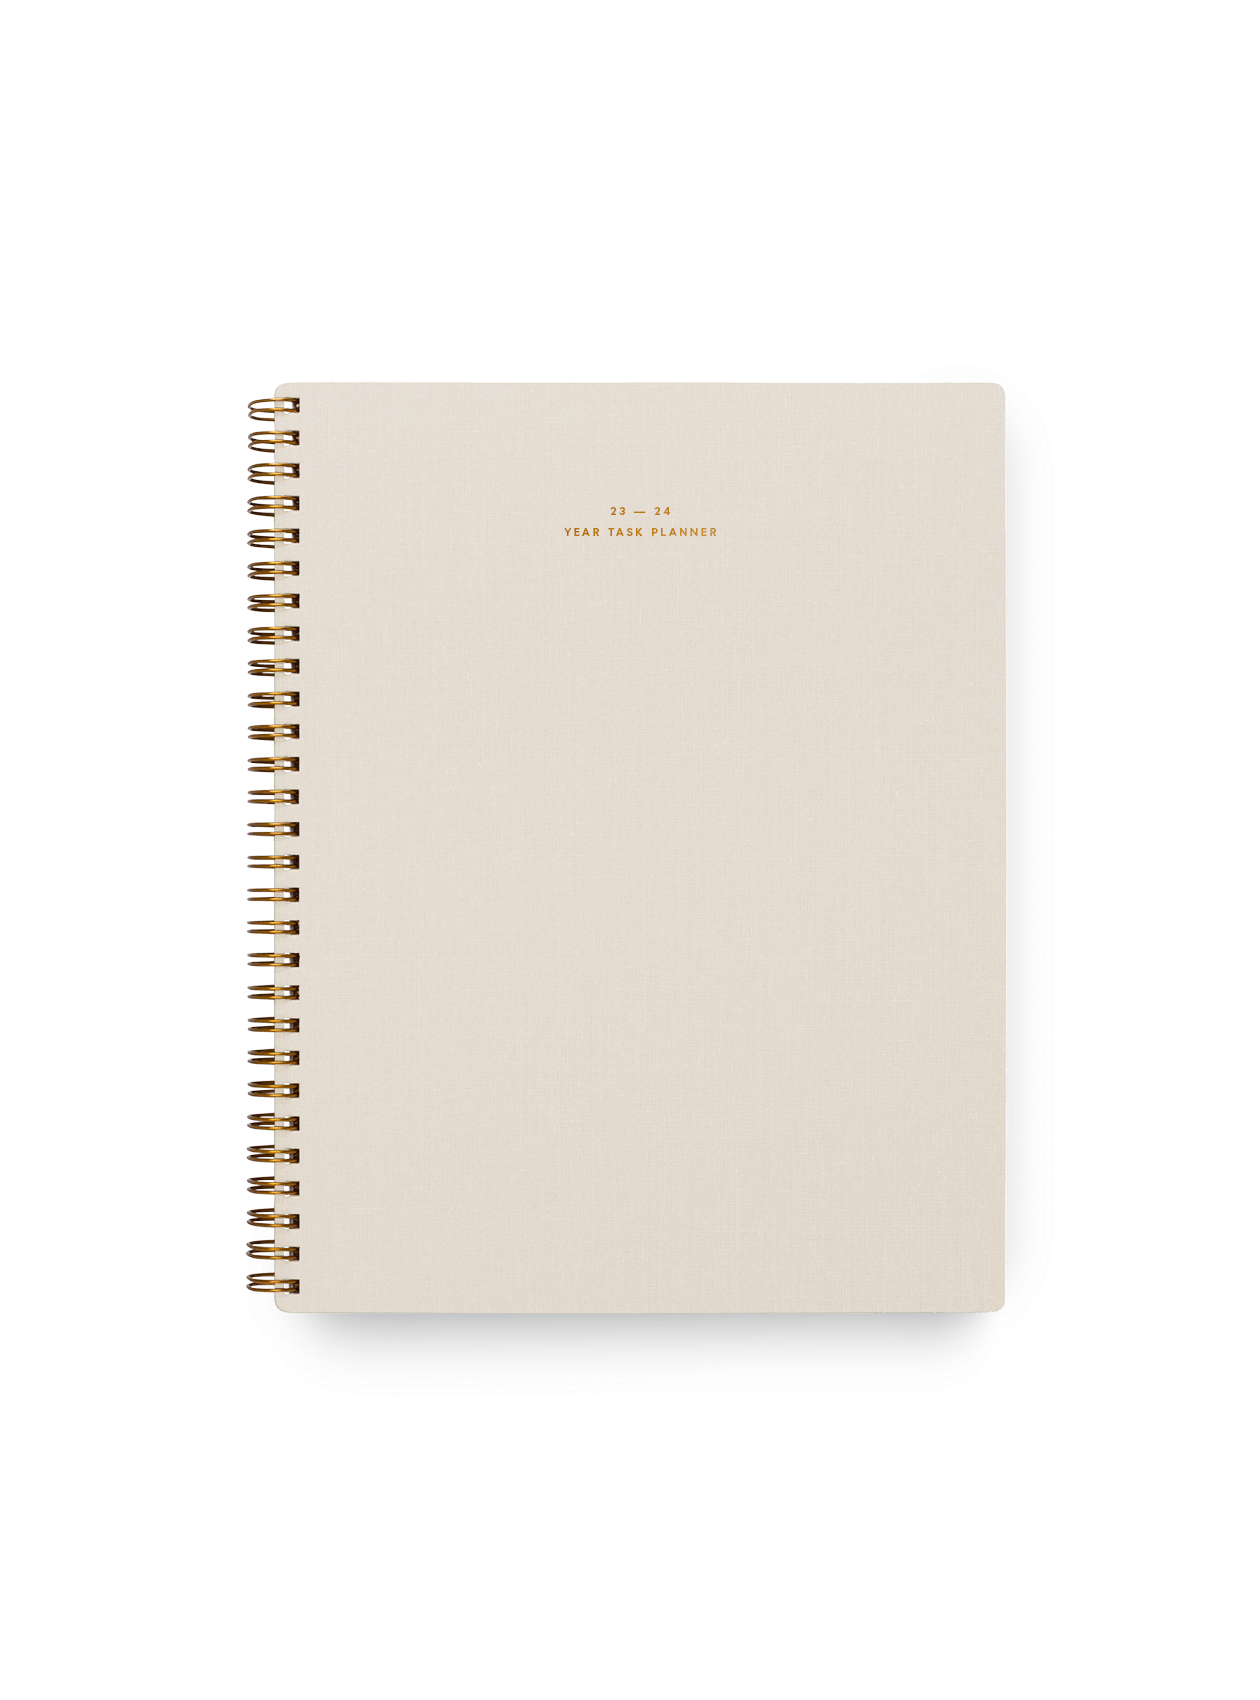 The Appointed 23-34 Year Task Planner in Charcoal Gray with brass wire-o binding, foil details, and textured bookcloth covers || Natural Linen